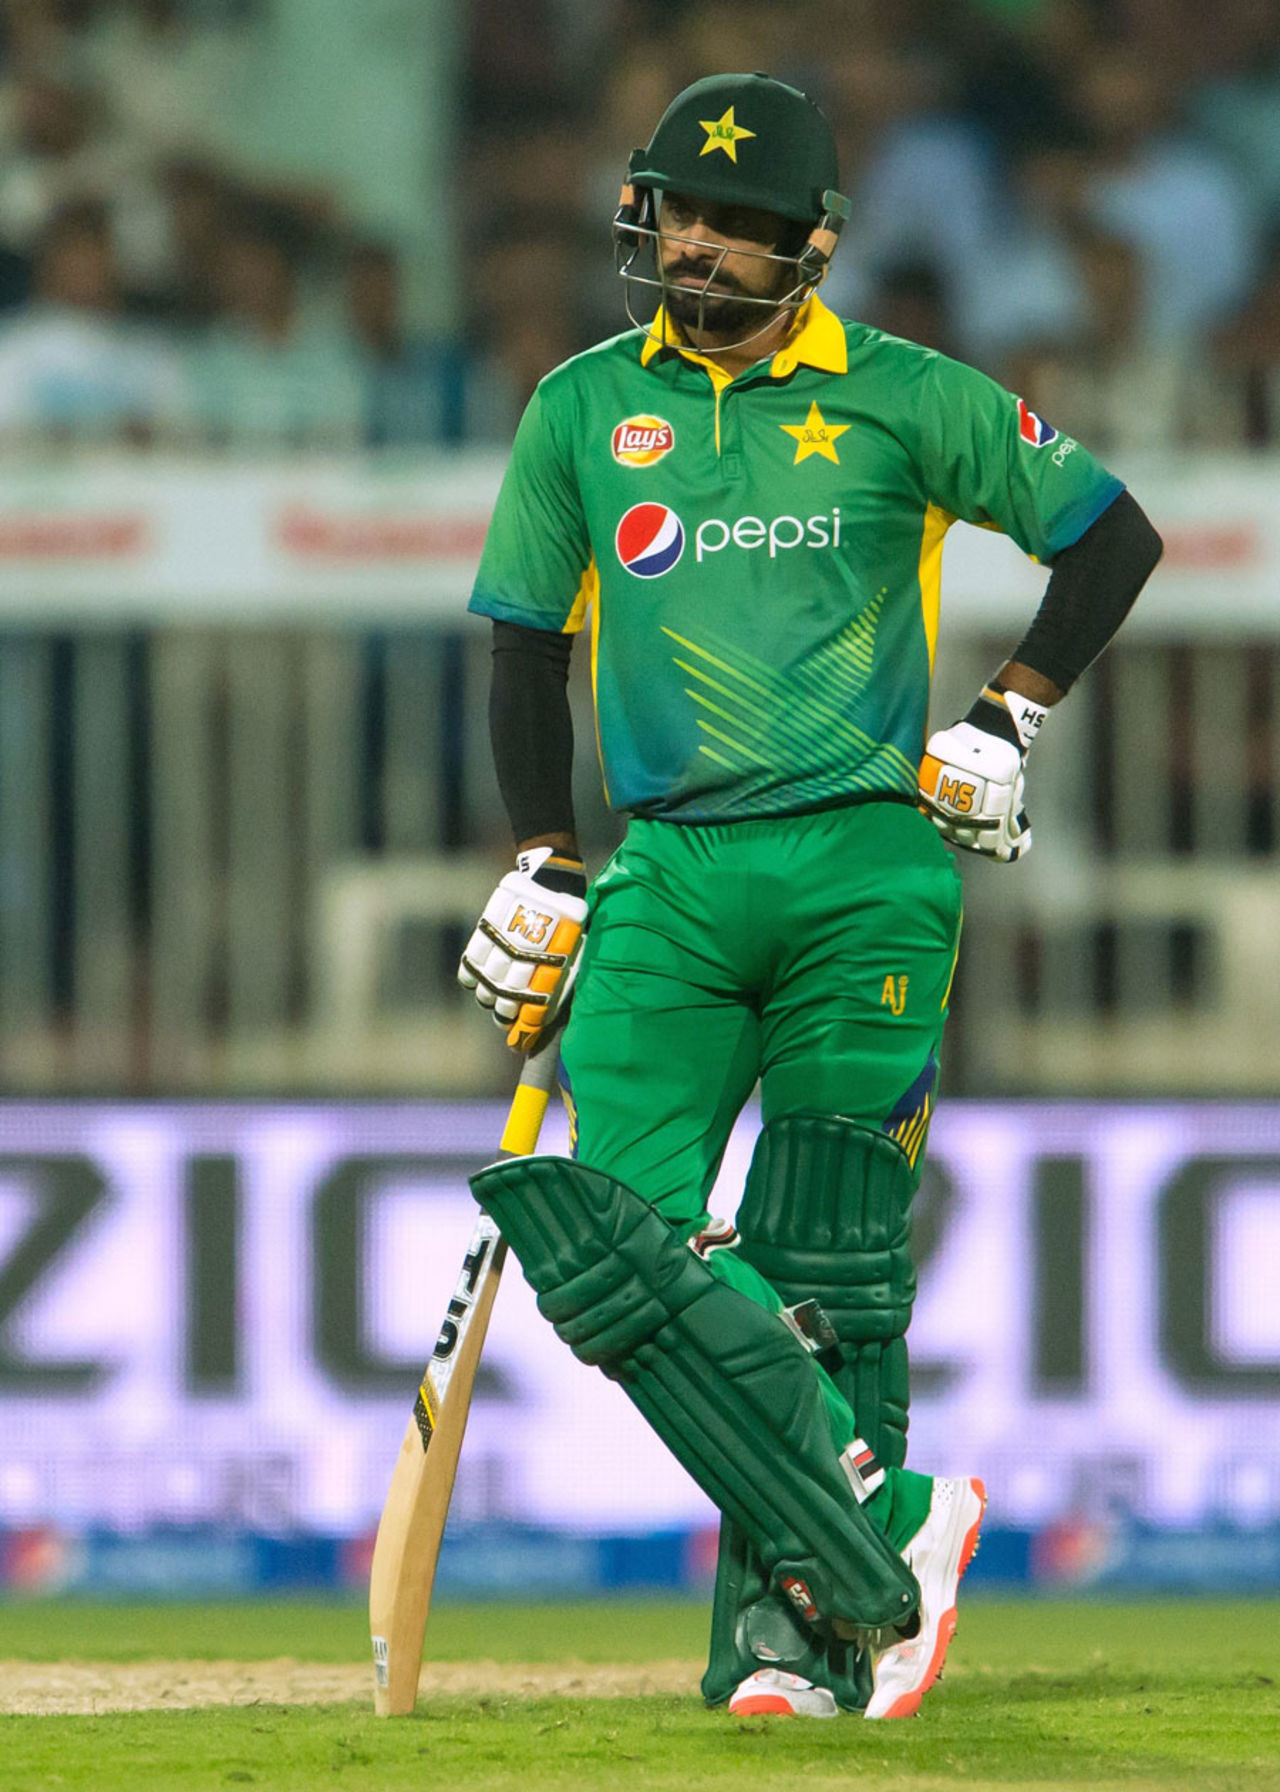 Mohammad Hafeez was involved in another run-out, Pakistan v England, 3rd T20, Sharjah, November 30, 2015